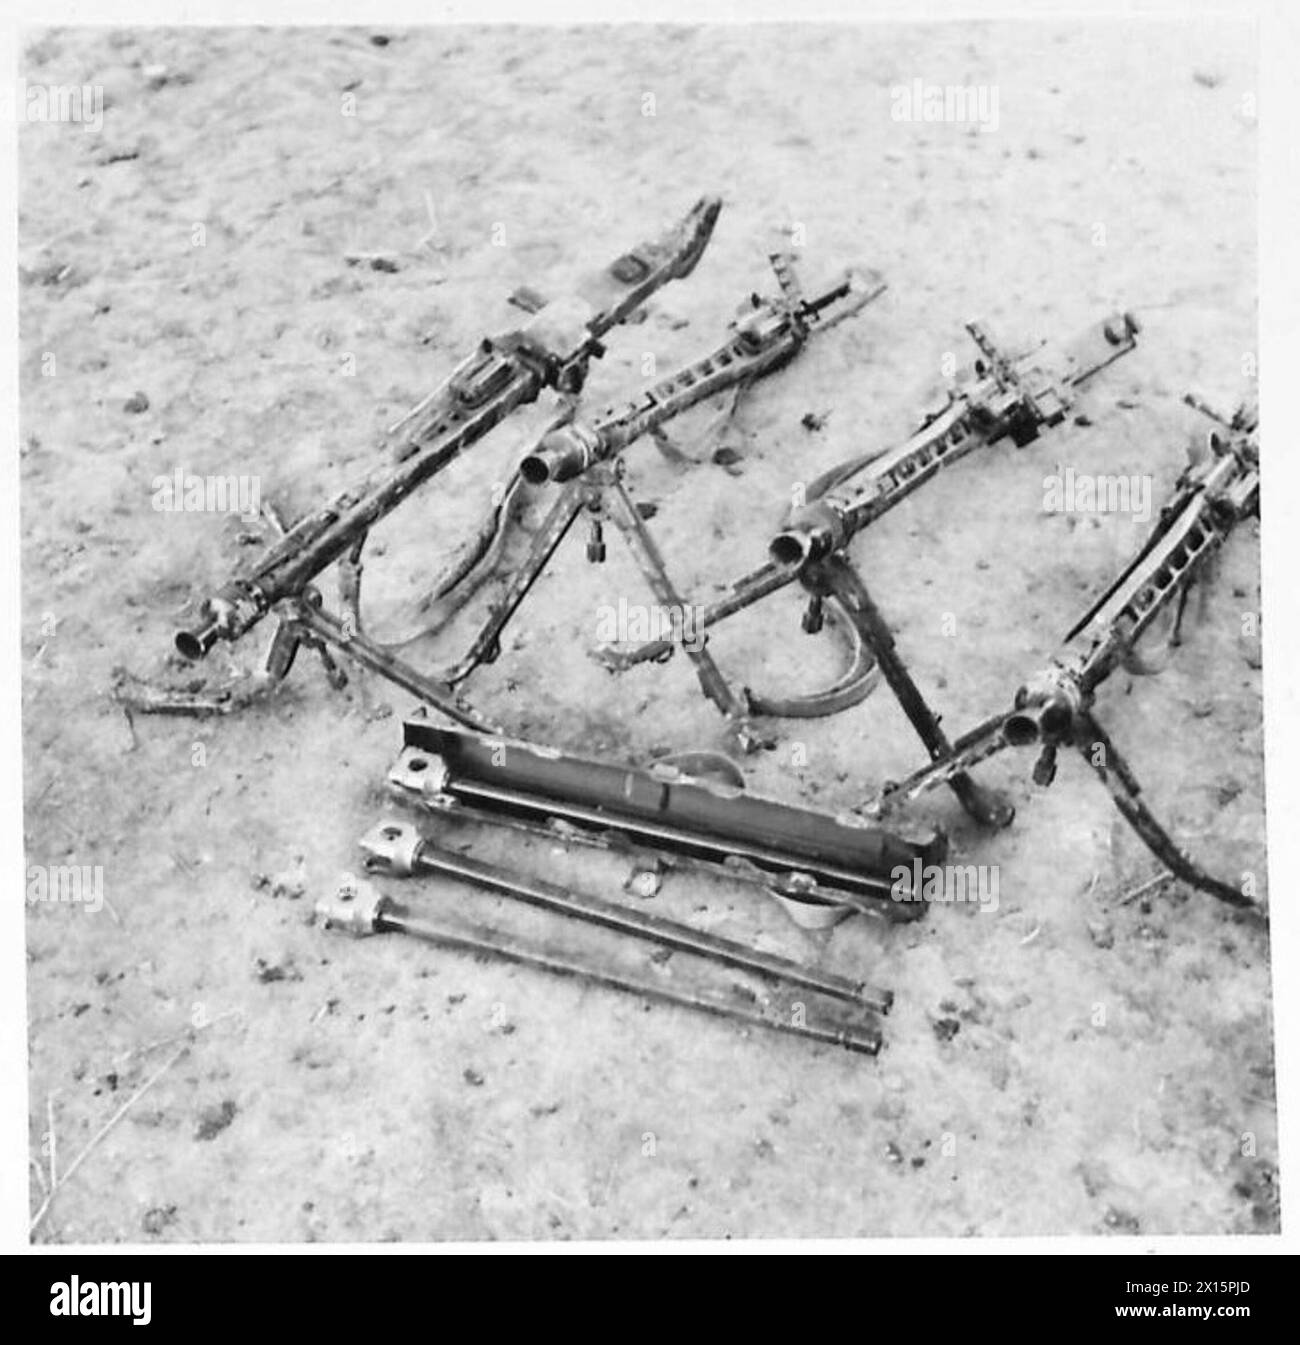 THE BRITISH ARMY IN THE TUNISIA CAMPAIGN, NOVEMBER 1942-MAY 1943 - Captured German MG 42 machine guns, probably at Ain Tunga, 3 January 1943 British Army, British Army, 1st Army, German Army Stock Photo